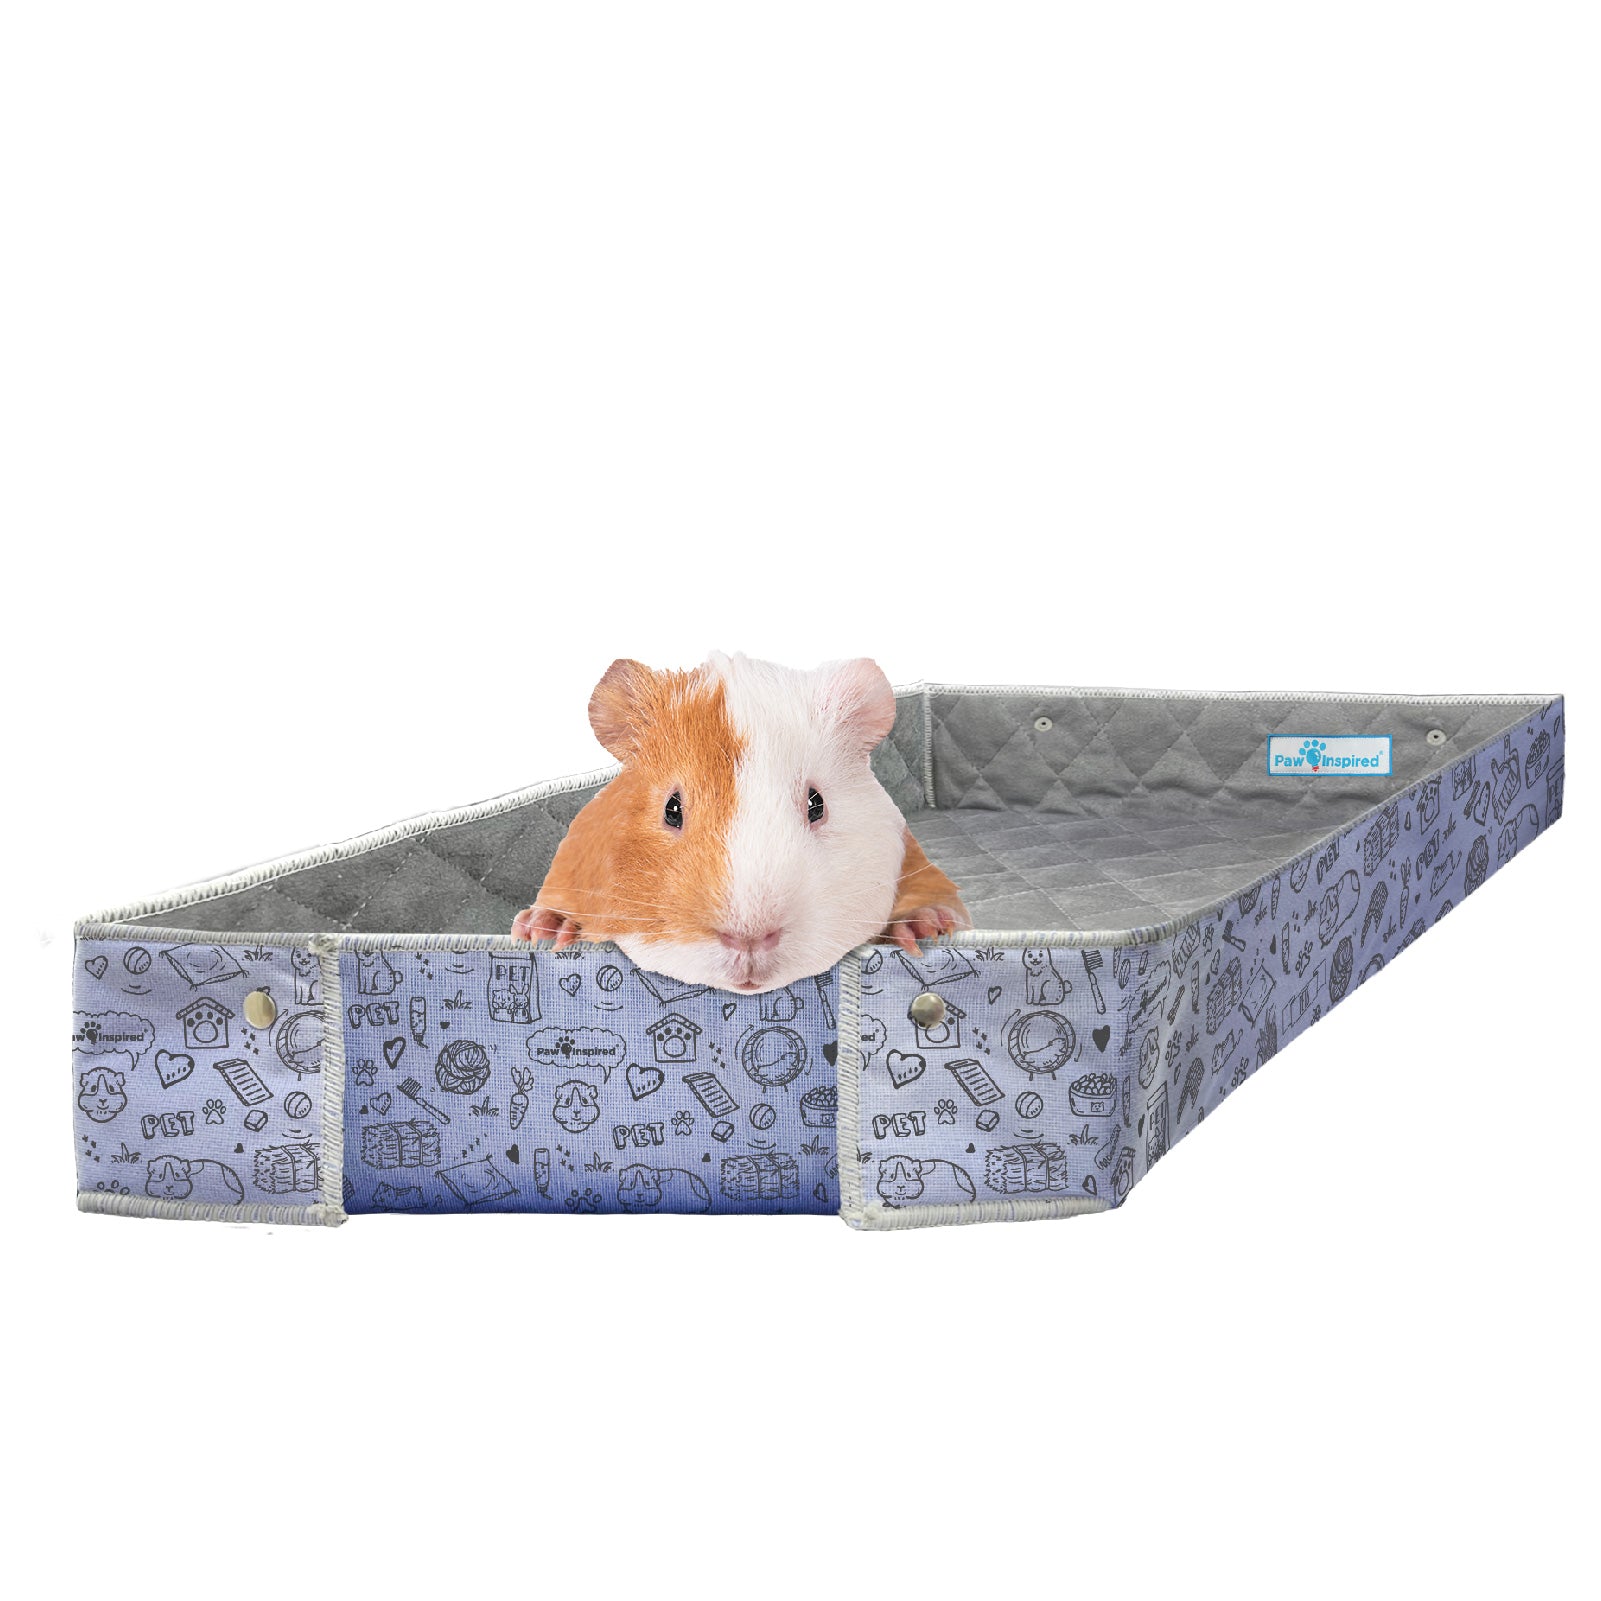 Paw Inspired® Critter Box® Washable Guinea Pig Cage Liner with Raised Sides